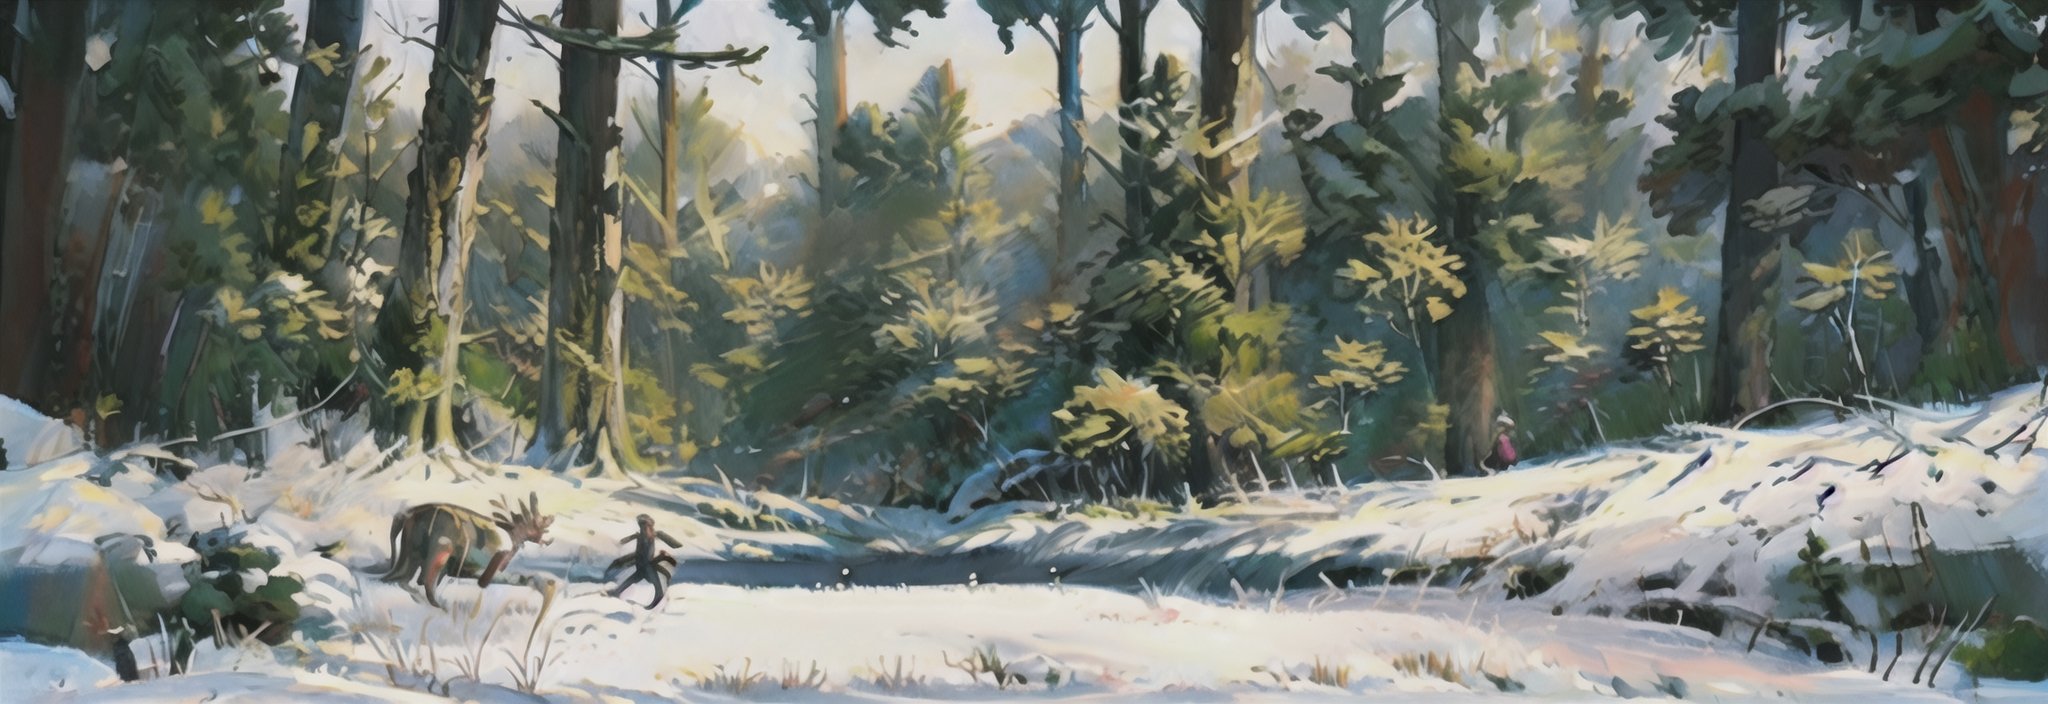 awe-inspiring scene of a snow-covered forest inhabited by majestic, mythical creatures like winter unicorns and frost dragons. The forest is illuminated by the soft glow of magical crystals hanging from the trees  snow-covered forest in turmoil, with the mythical creatures in a heated disagreement. Depict the majestic beasts causing a disturbance amidst the serene beauty of the forest